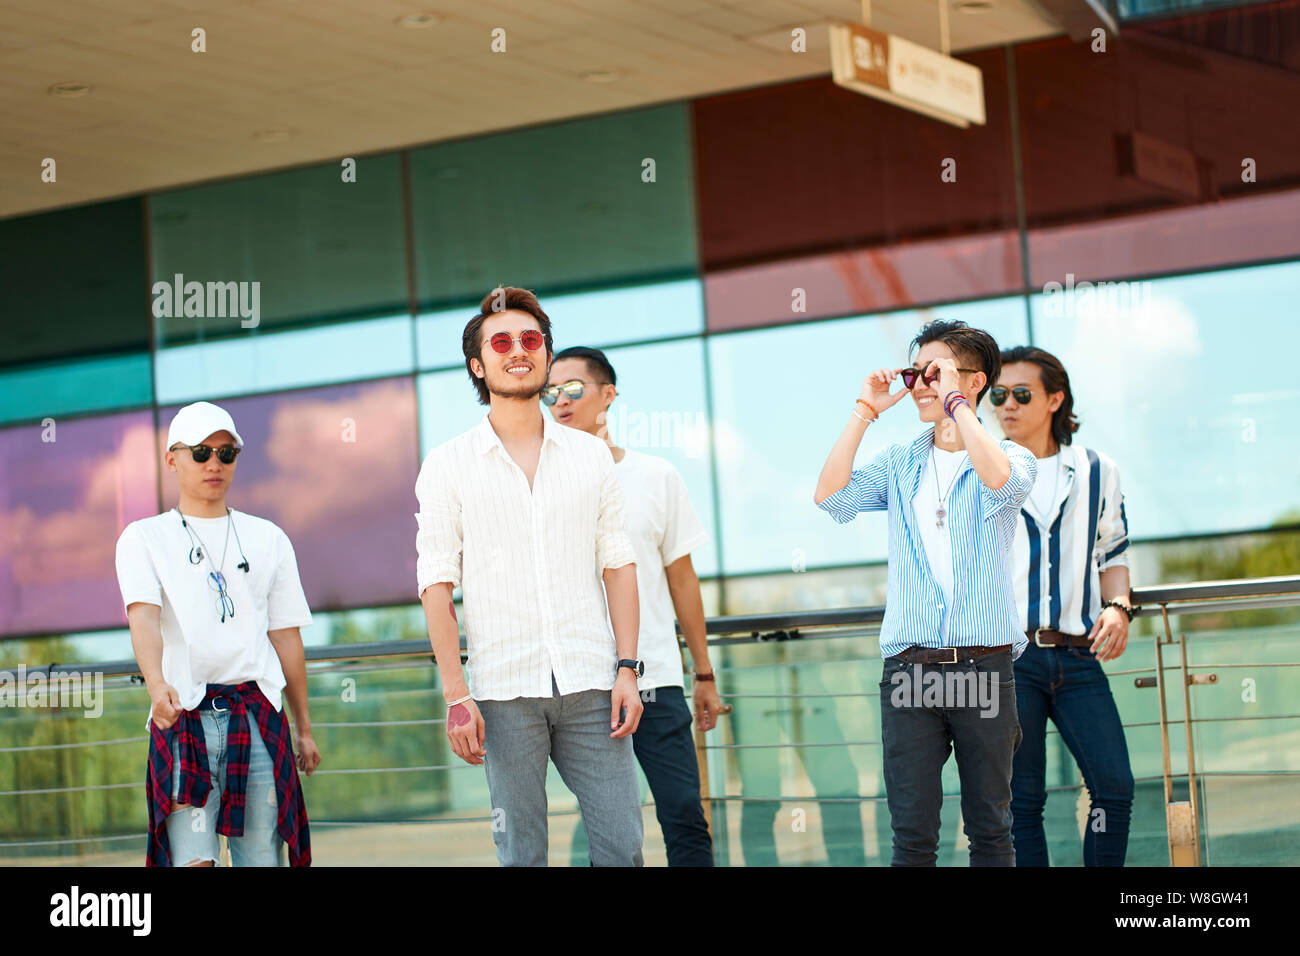 a group of five young asian adults hanging out together walking on street Stock Photo